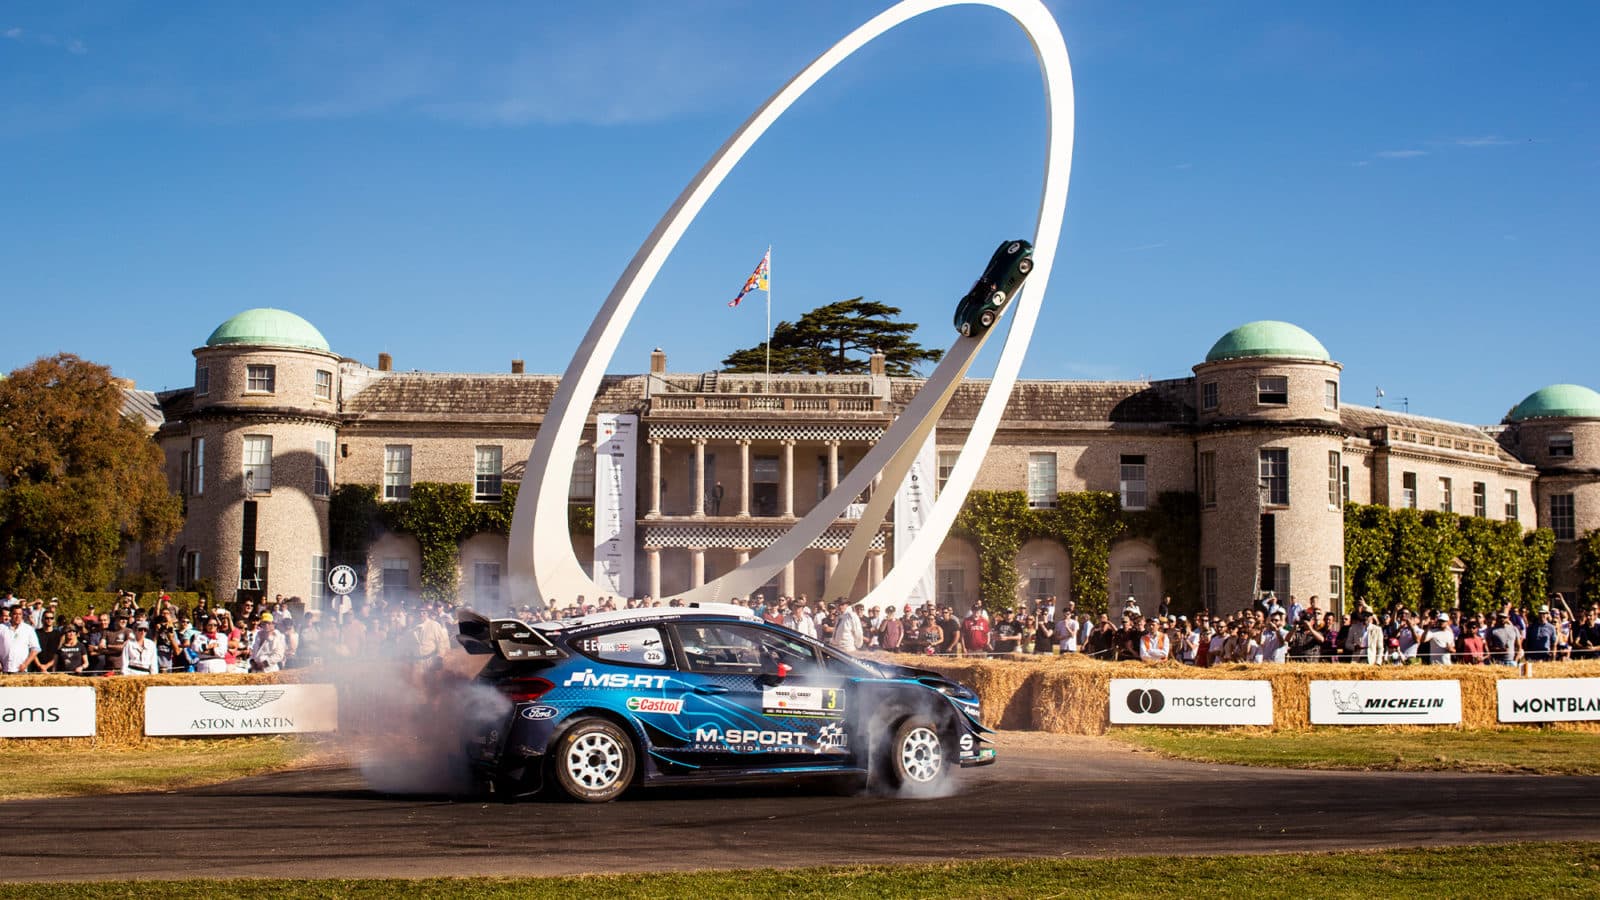 Goodwood Festival of Speed burnout